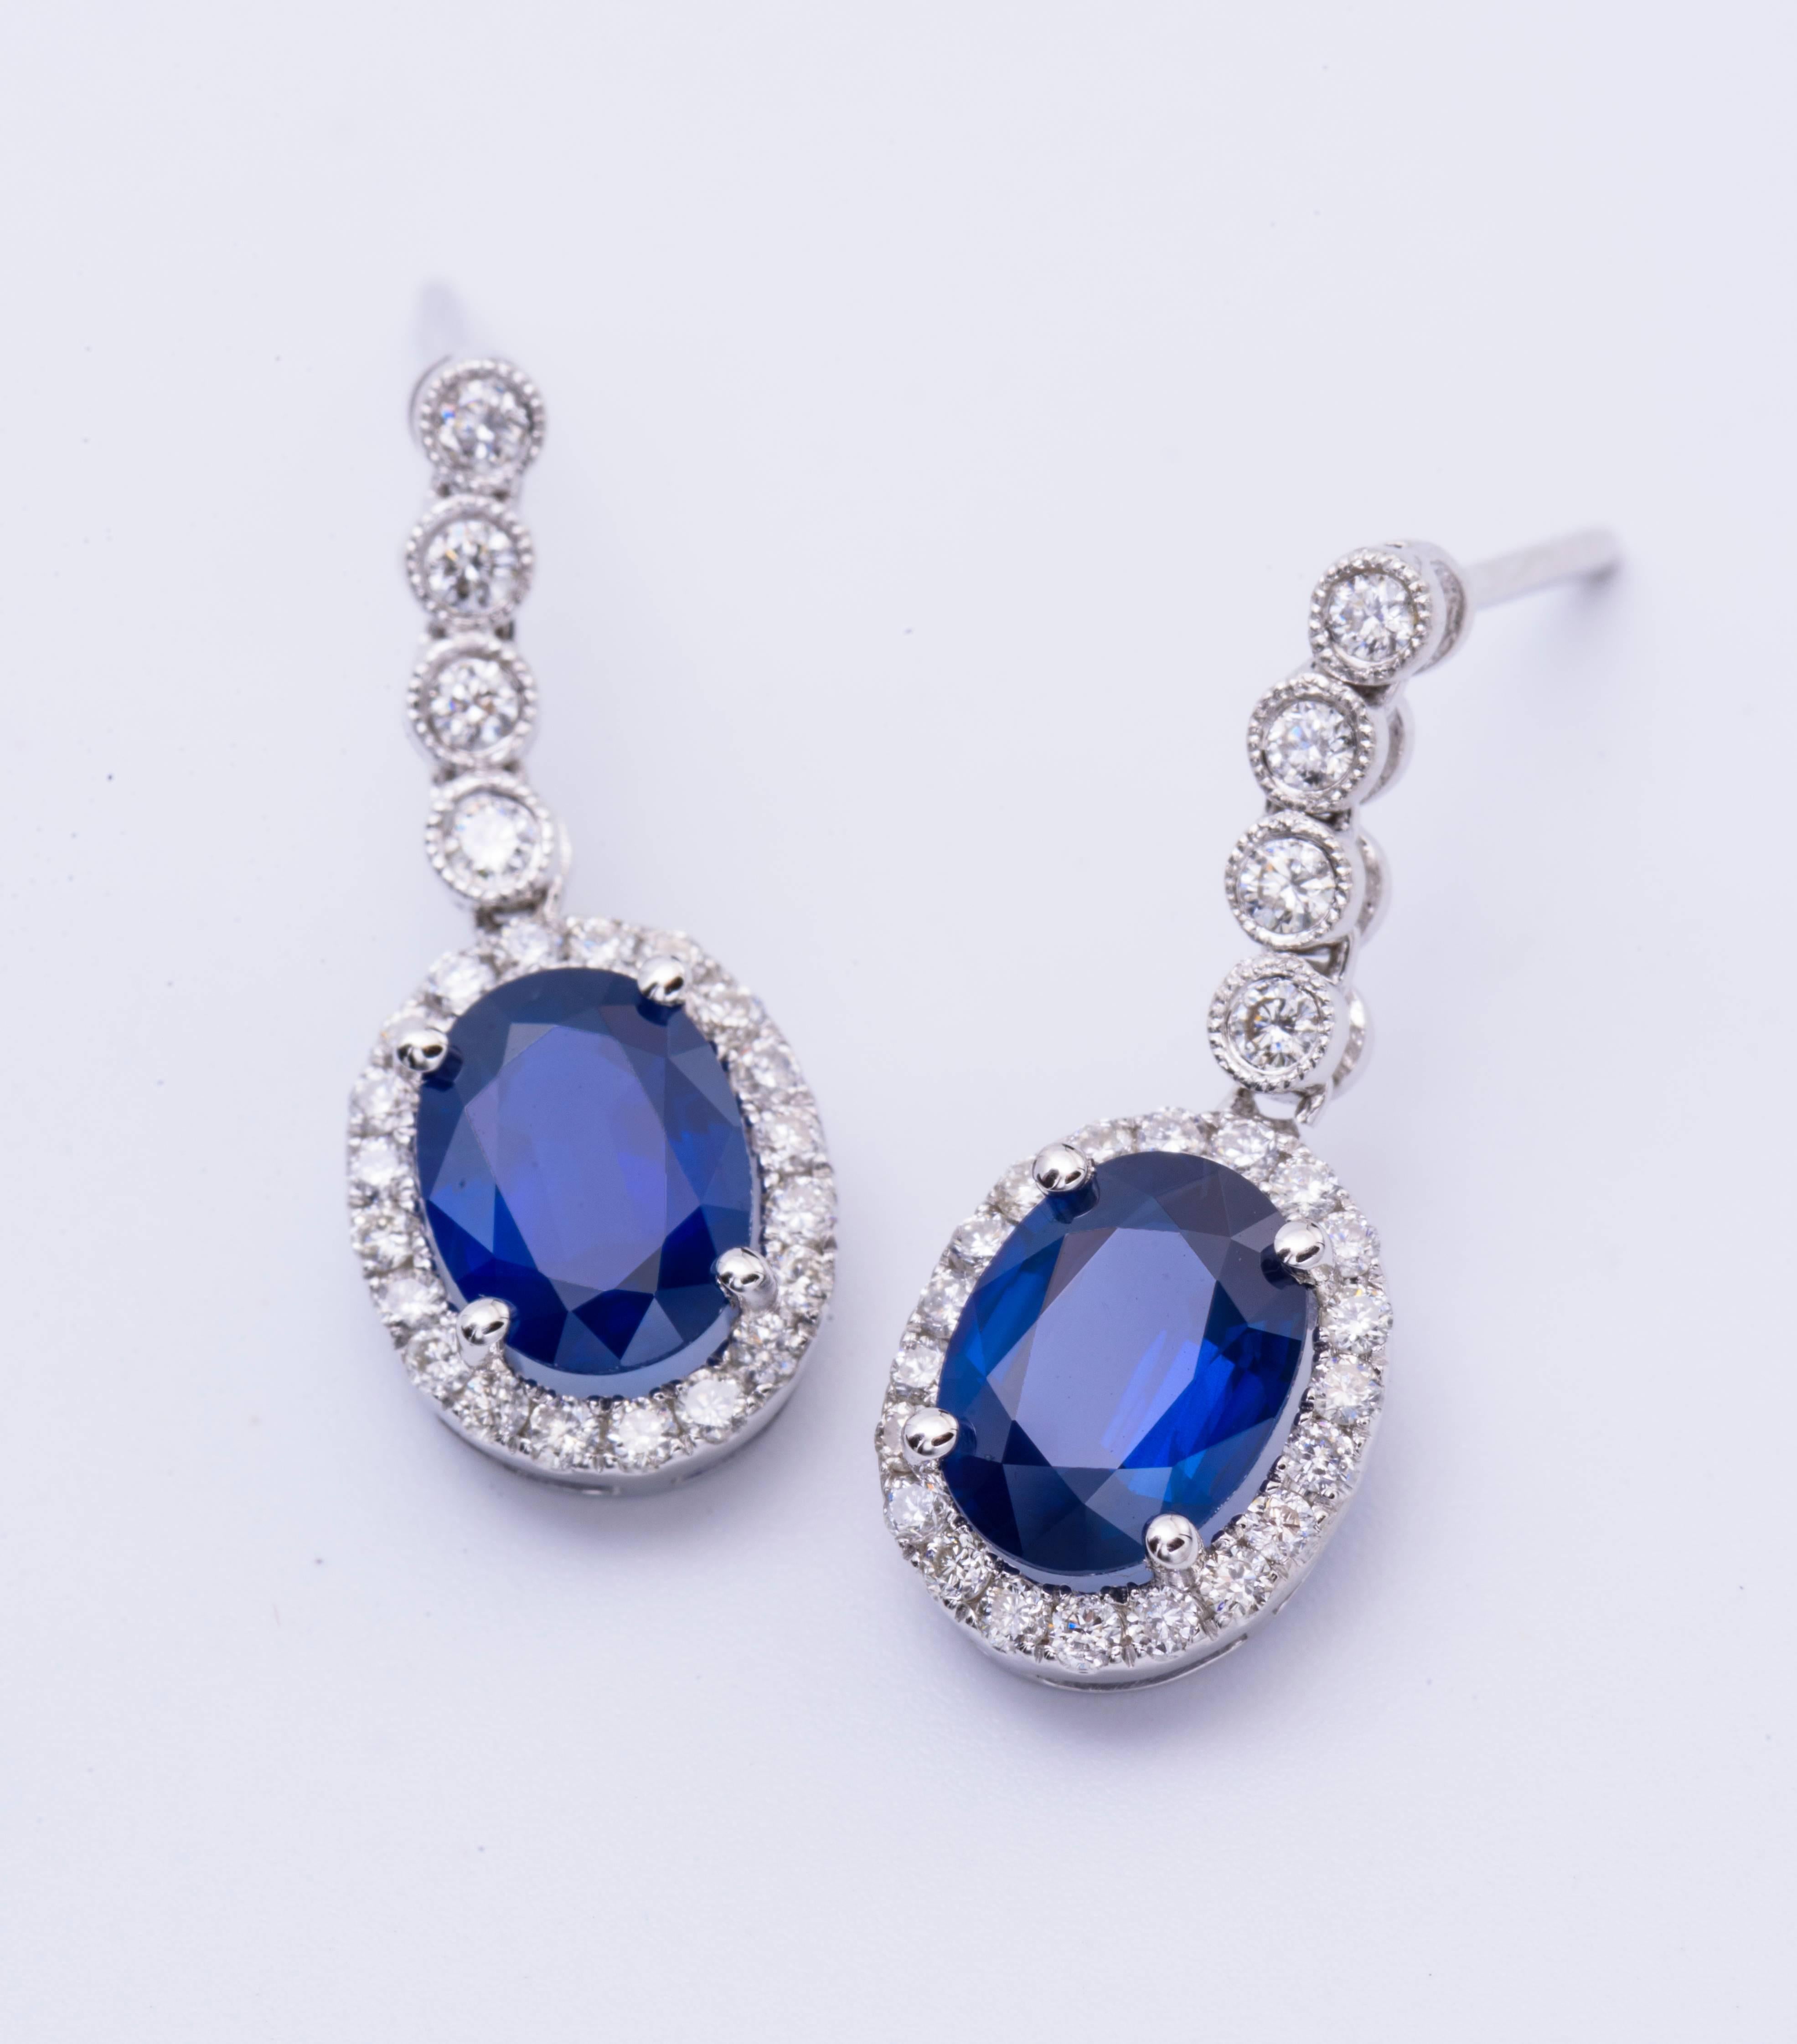 14k White gold earrings
Oval Sapphire 8 X 6 mm 2.90 Carats
Diamonds 0.56 Cts. total weight
The Earrings measures 22 X 9 mm 